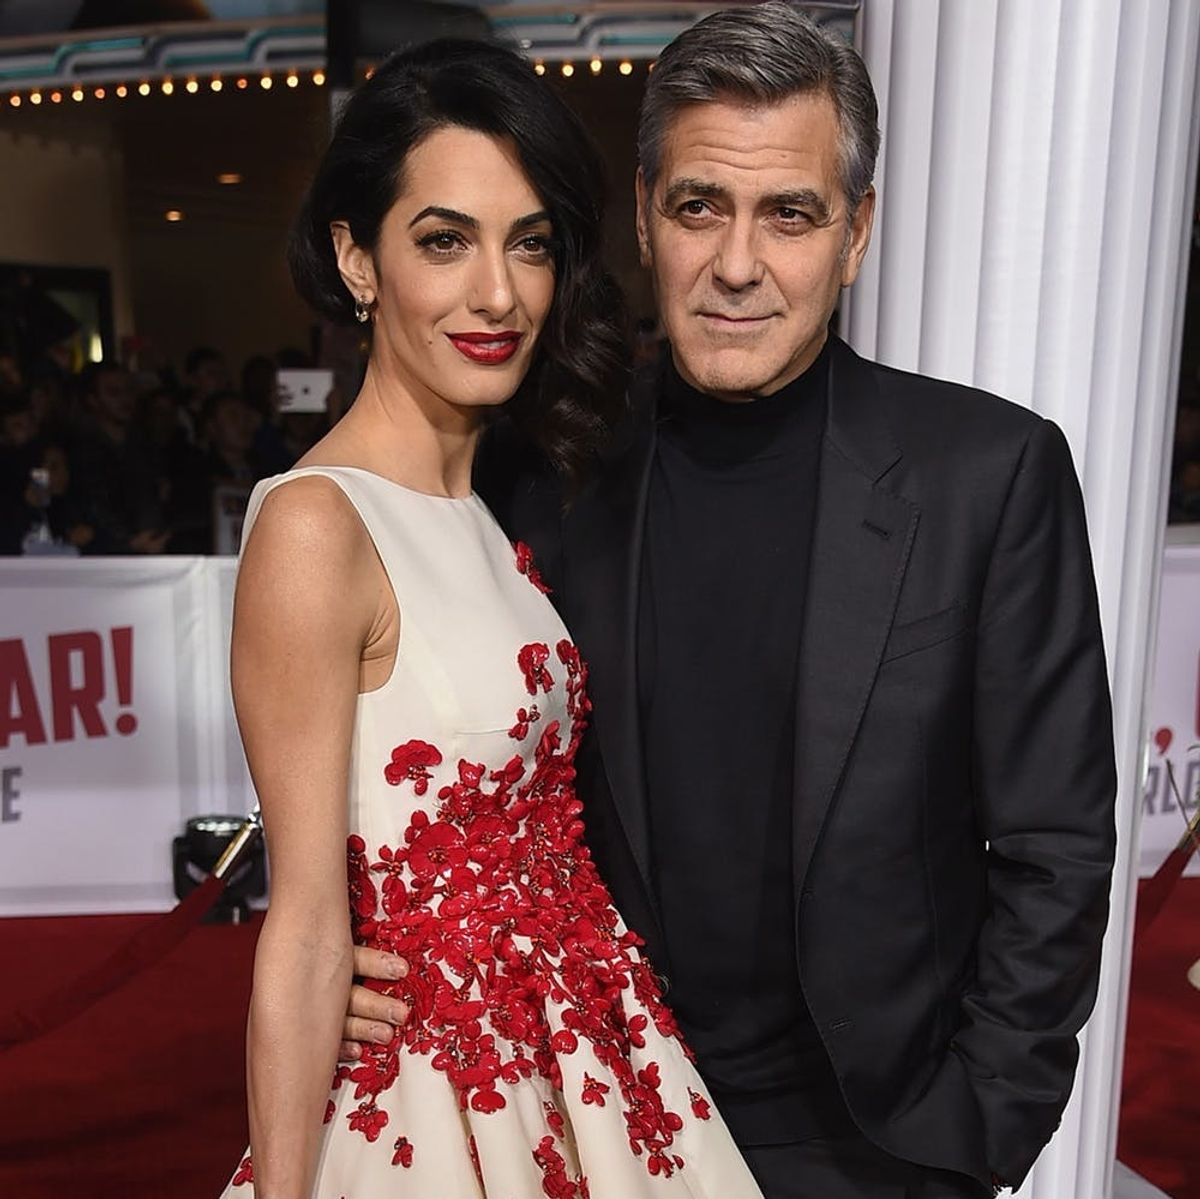 George Clooney Just Revealed That His Proposal to Amal Went Hilariously Wrong